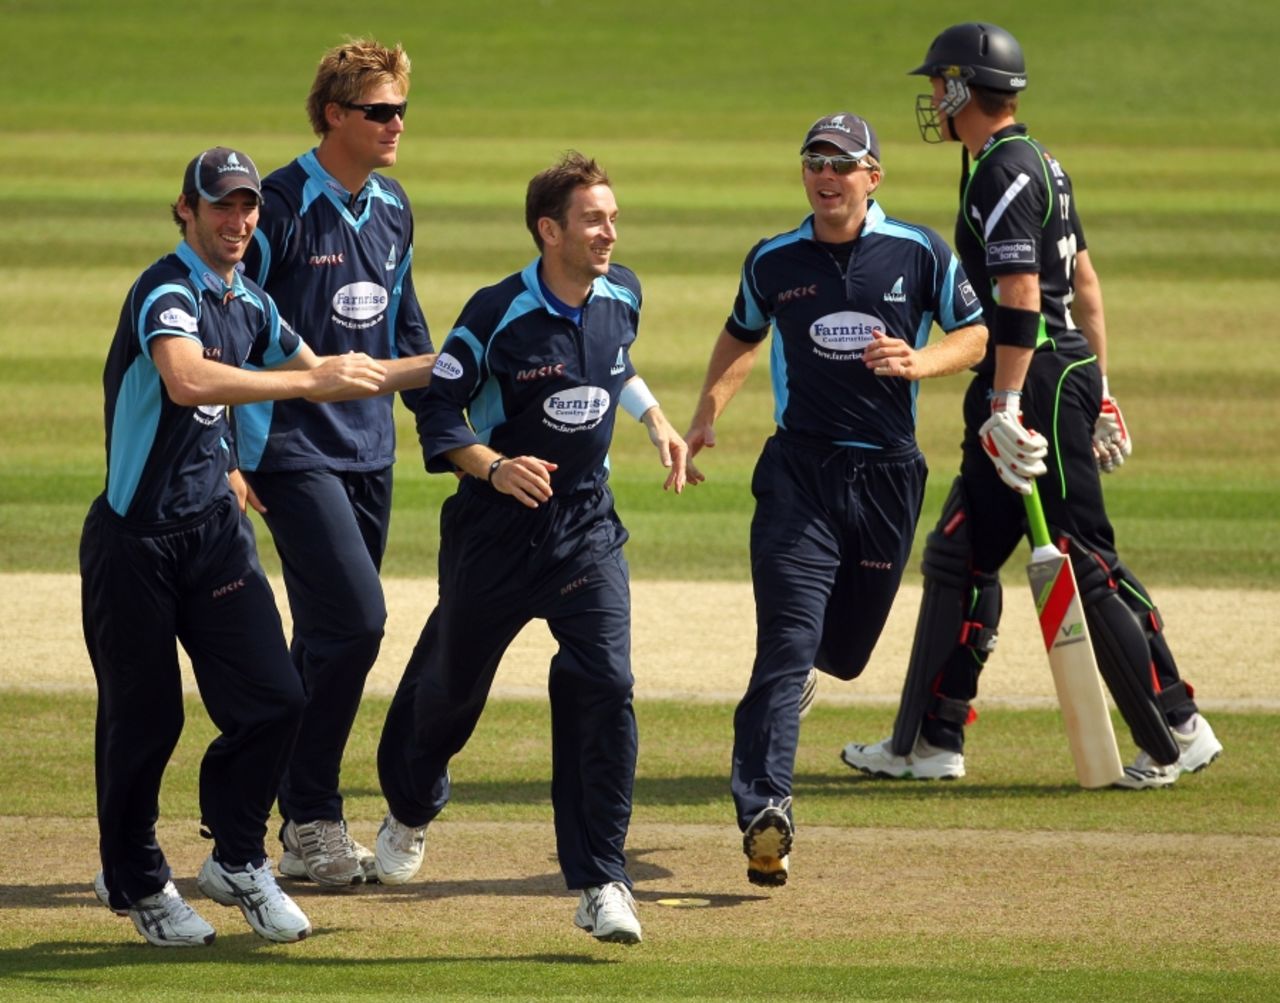 James Kirtley took three wickets to help set up a thrilling tie in his final game for Sussex, Sussex v Surrey, Clydesdale Bank 40, Hove, September 4 2010